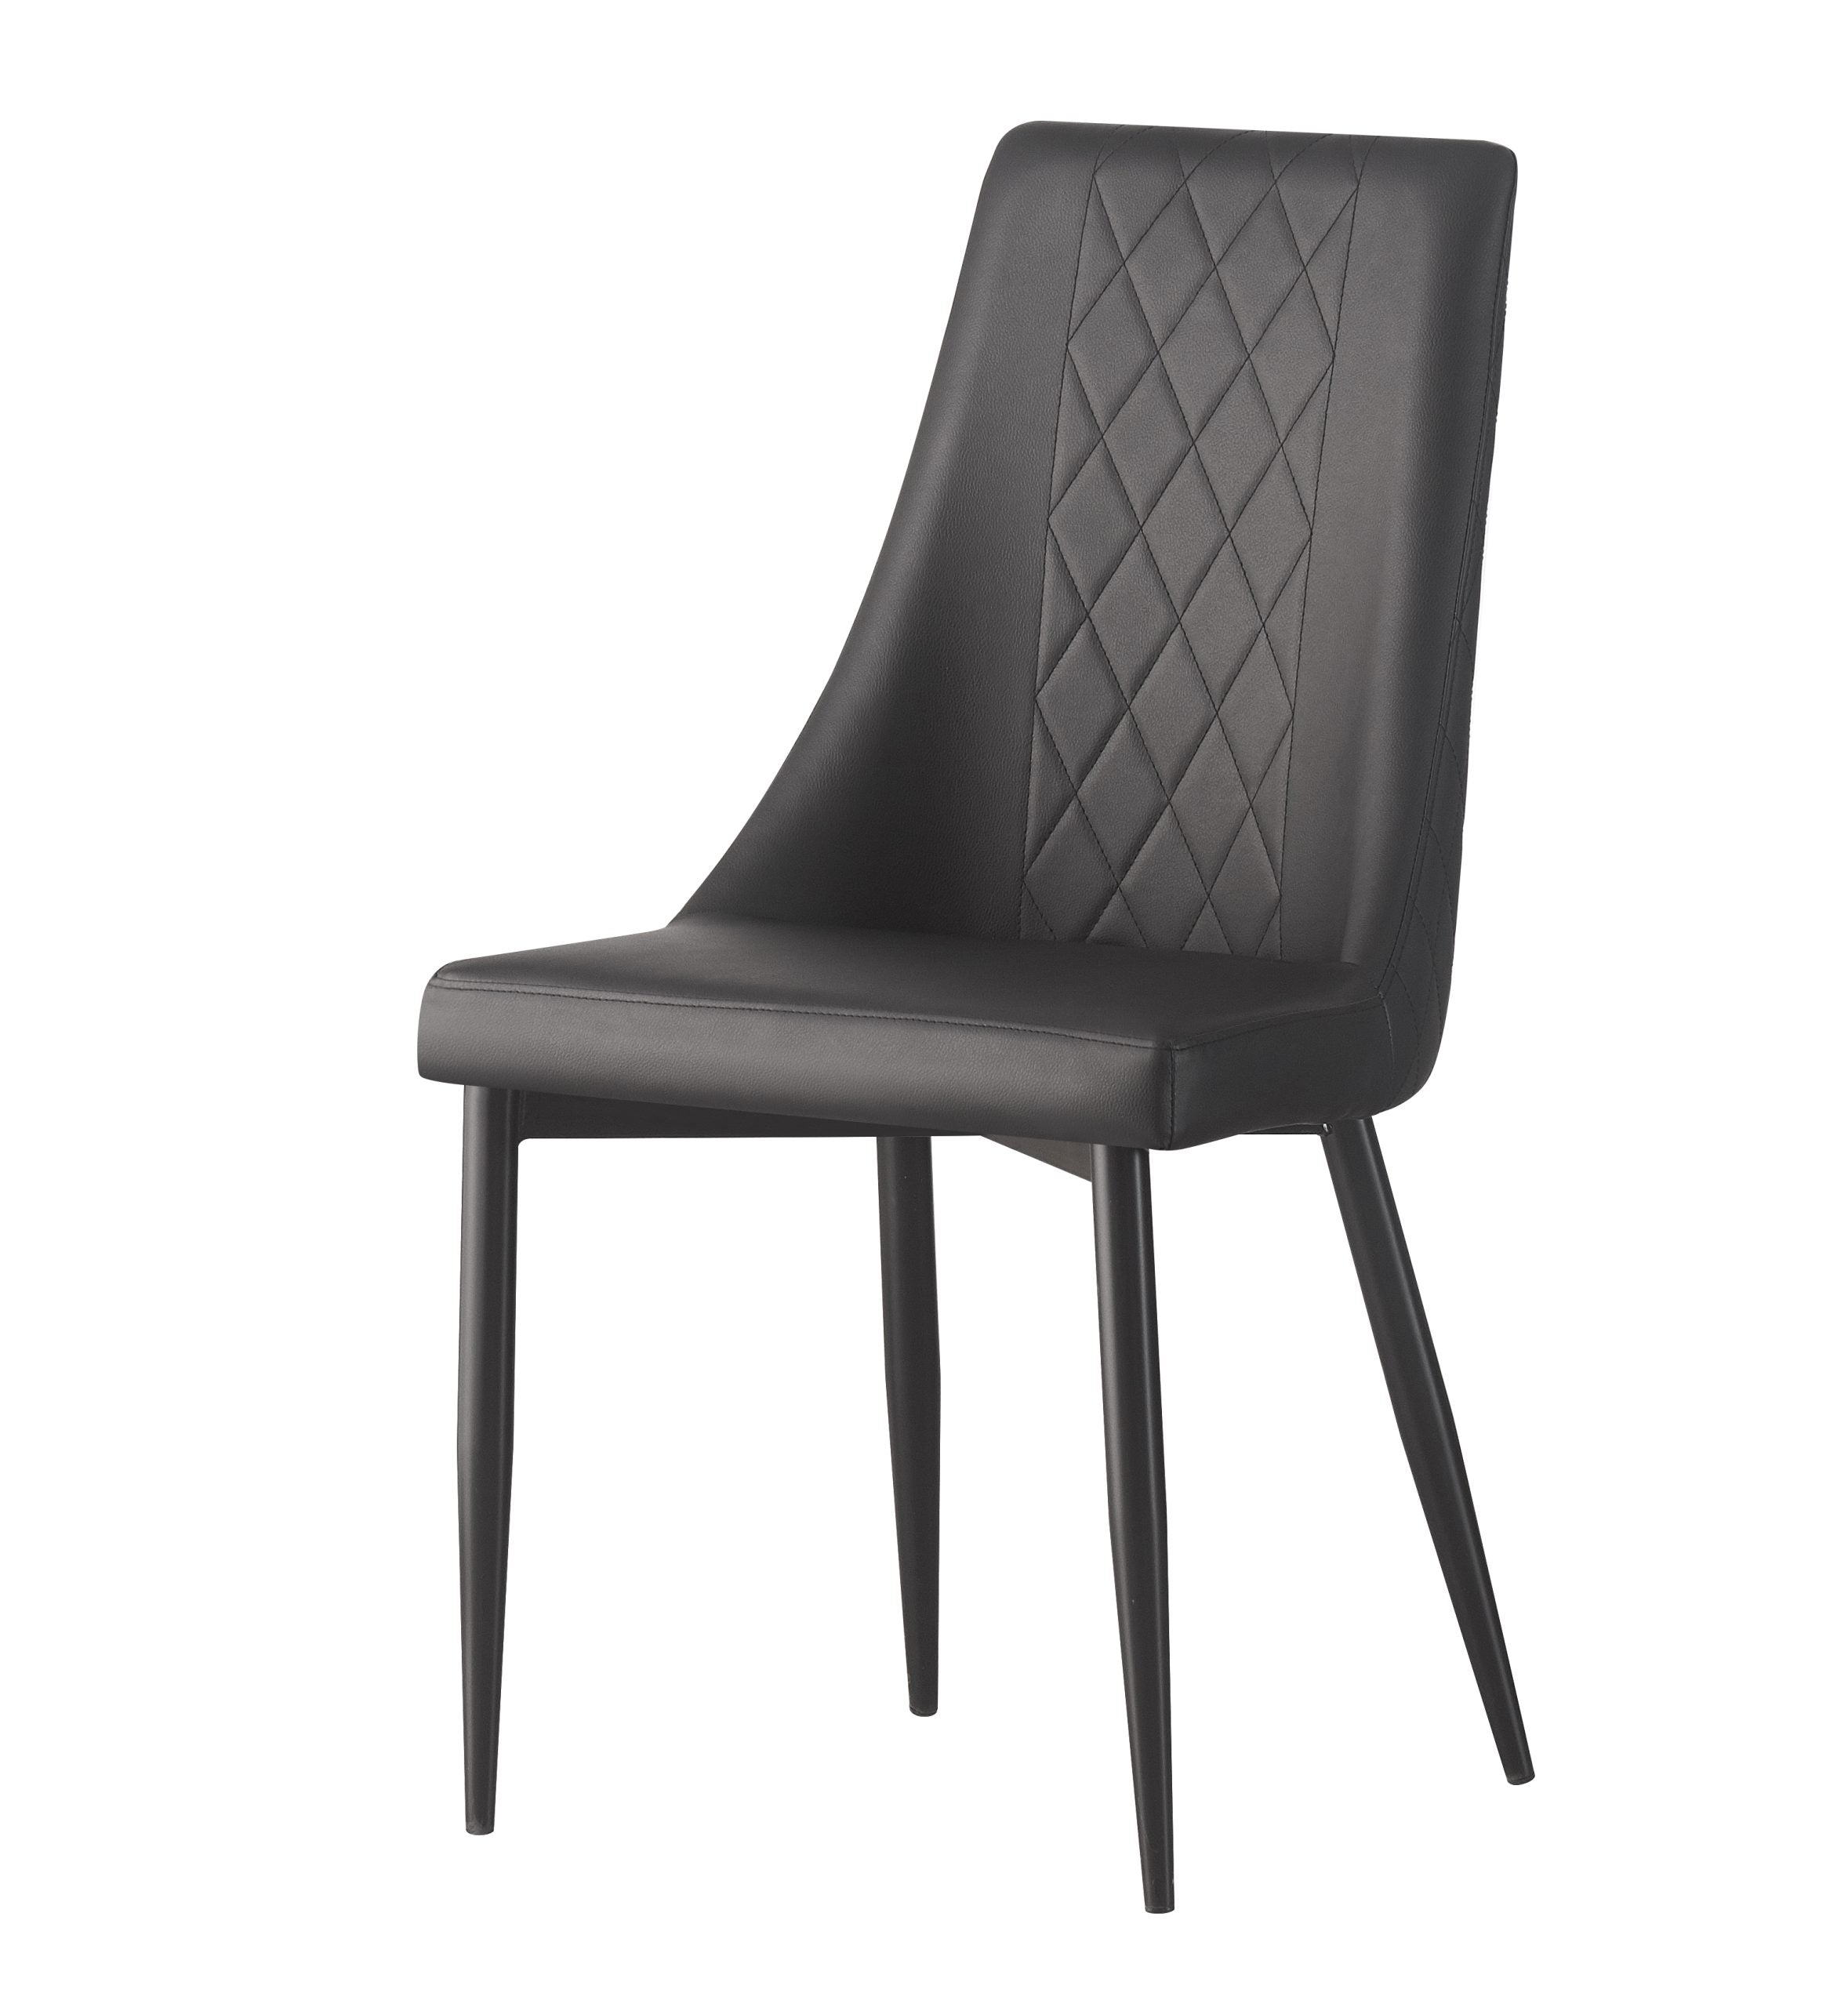 BT Magnus PU Leather Upholstered Dining Chair